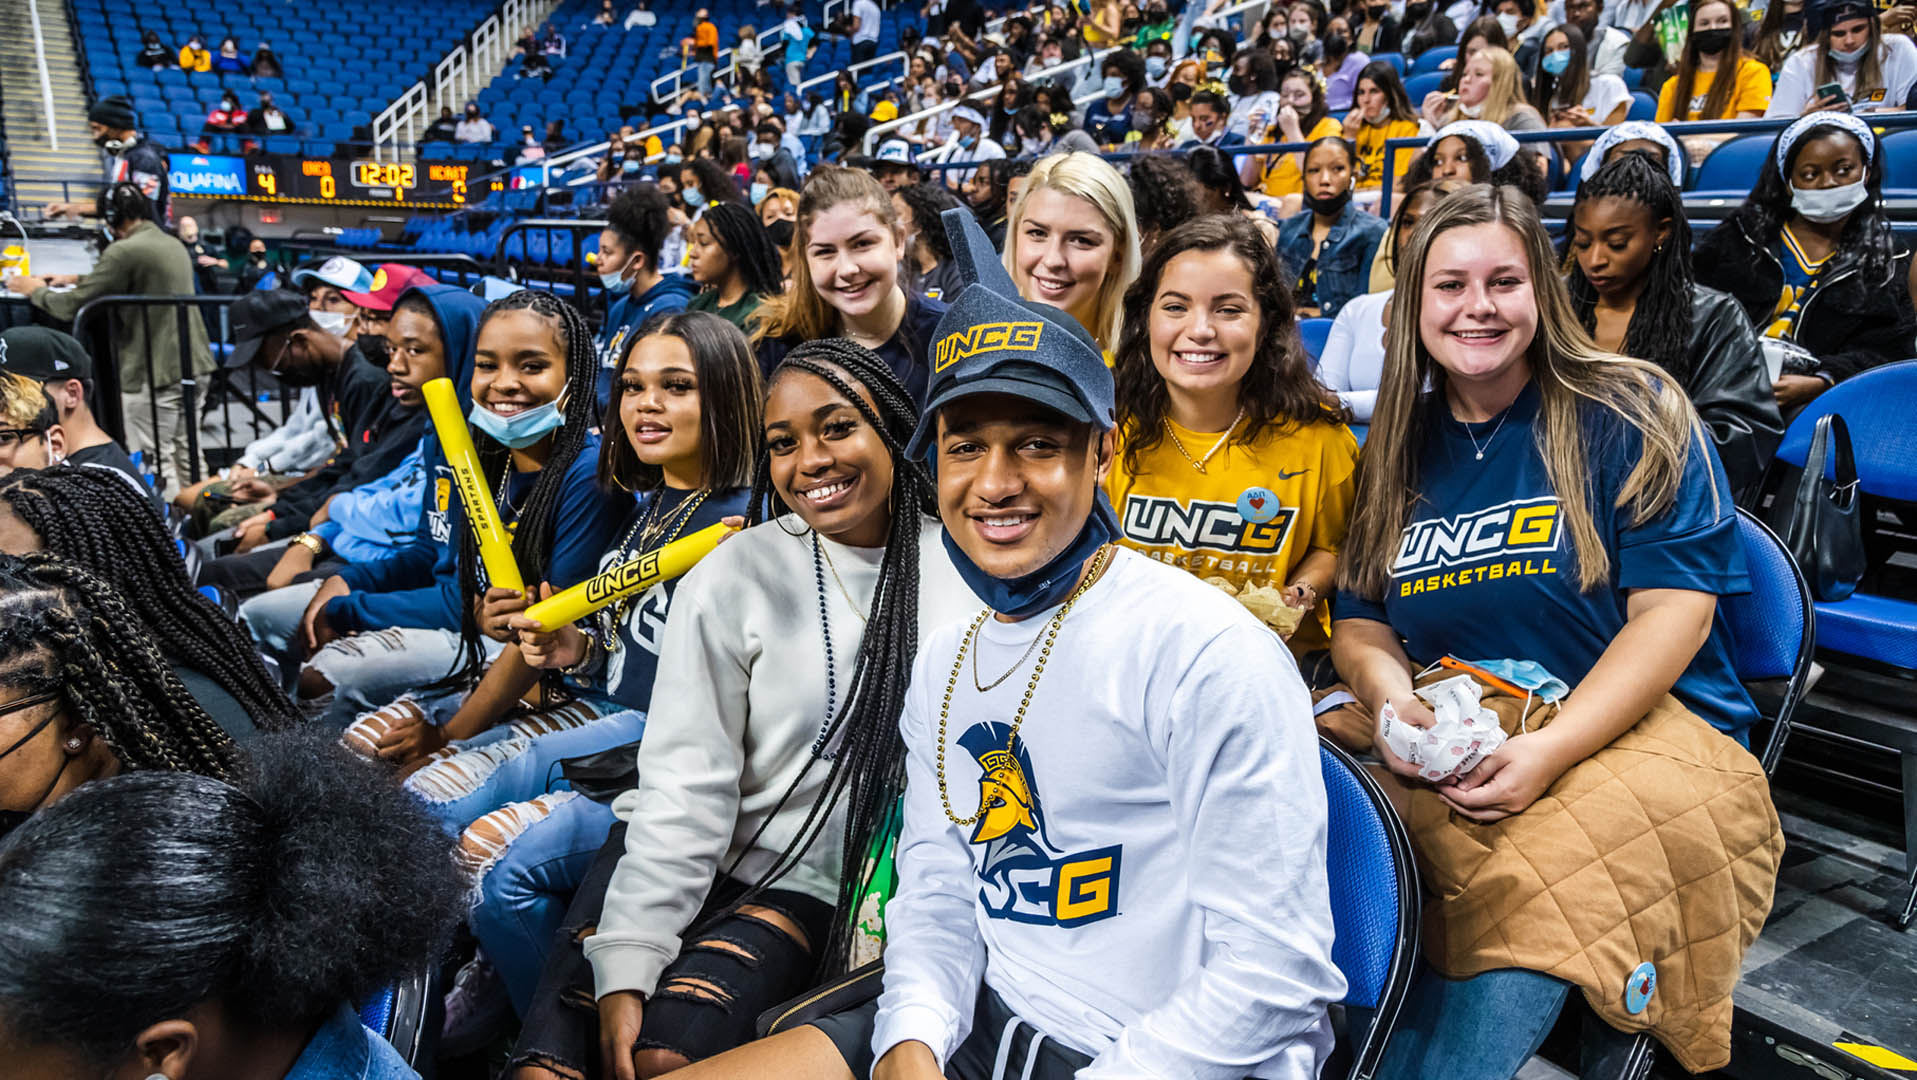 A group of students pose for a picture at a men’s basketball game at the Greensboro Coliseum.